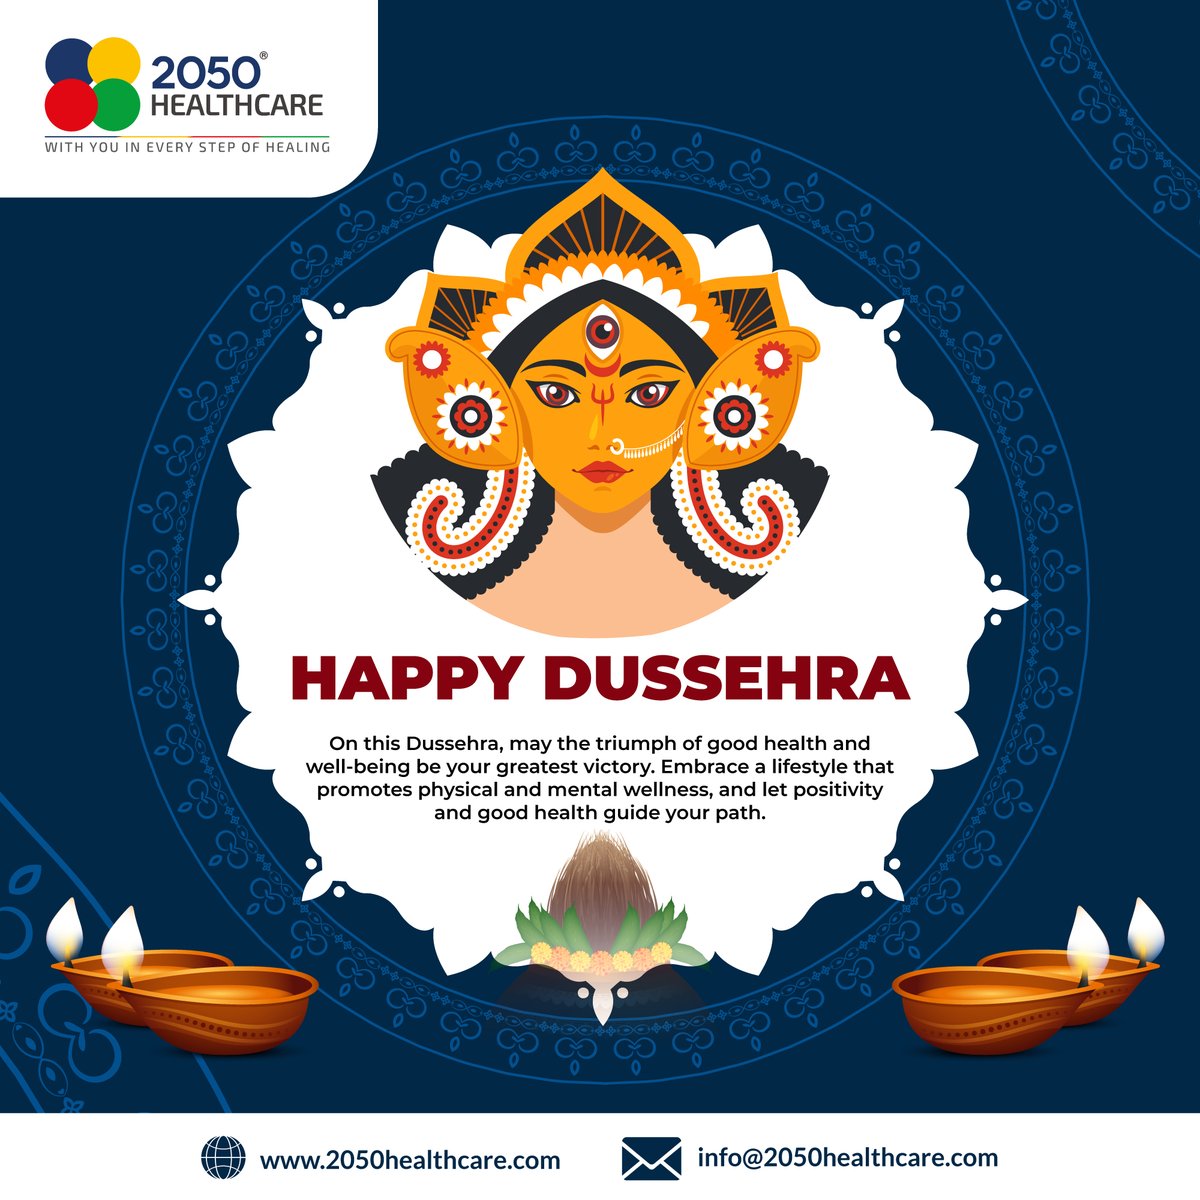 May the triumph of good over evil bring light and happiness to your life. Happy Dussehra! 🏹

#2050Healthcare #WithYouInEveryStepOfHealing